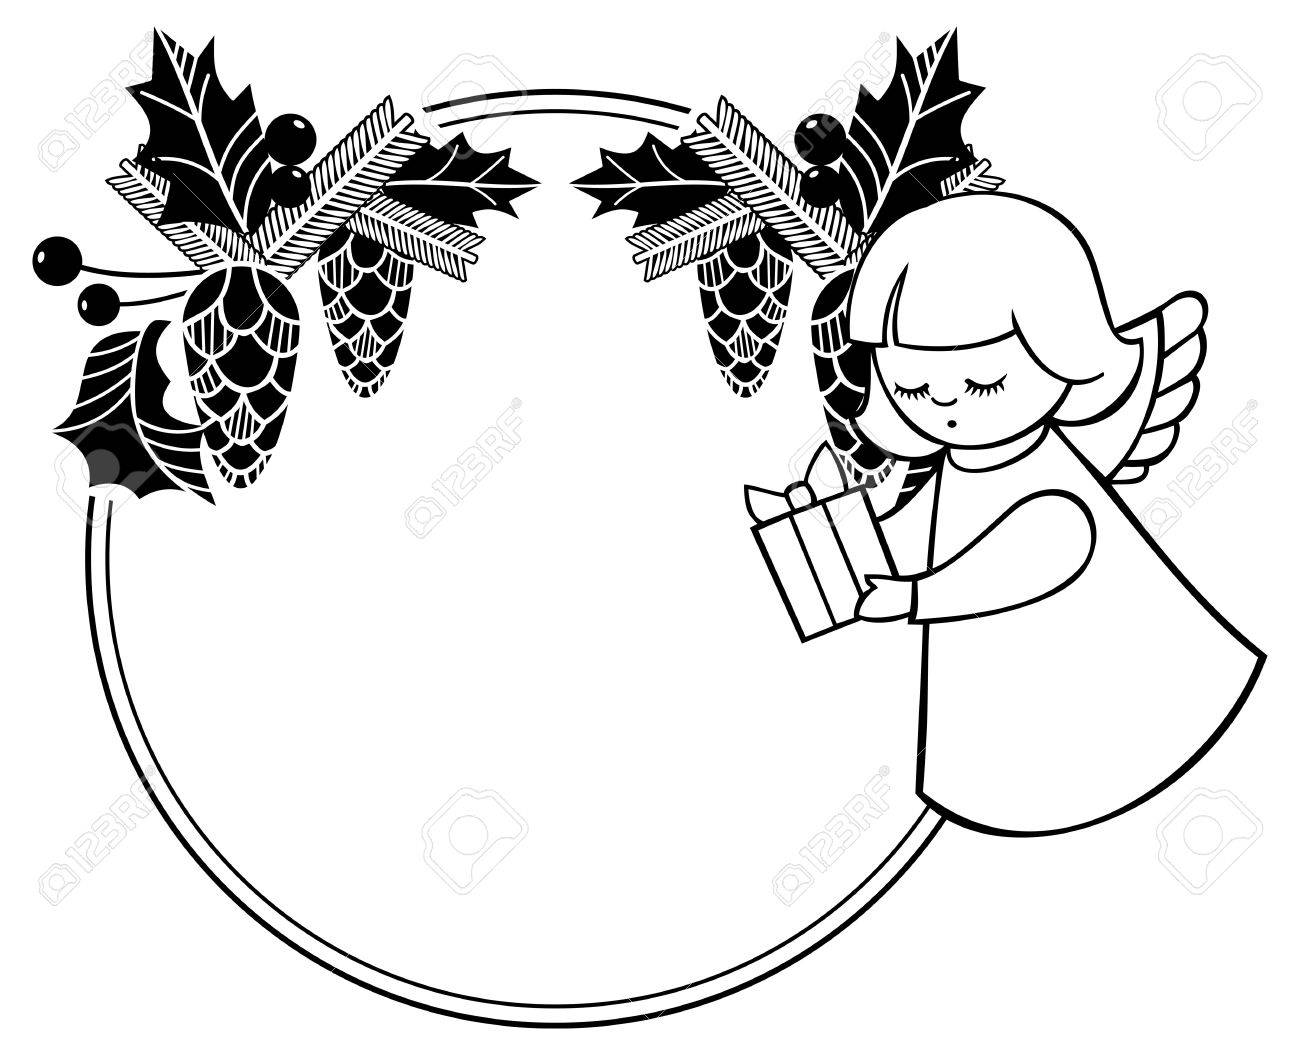 Black and white rouen Christmas frame with cute angels. Copy...